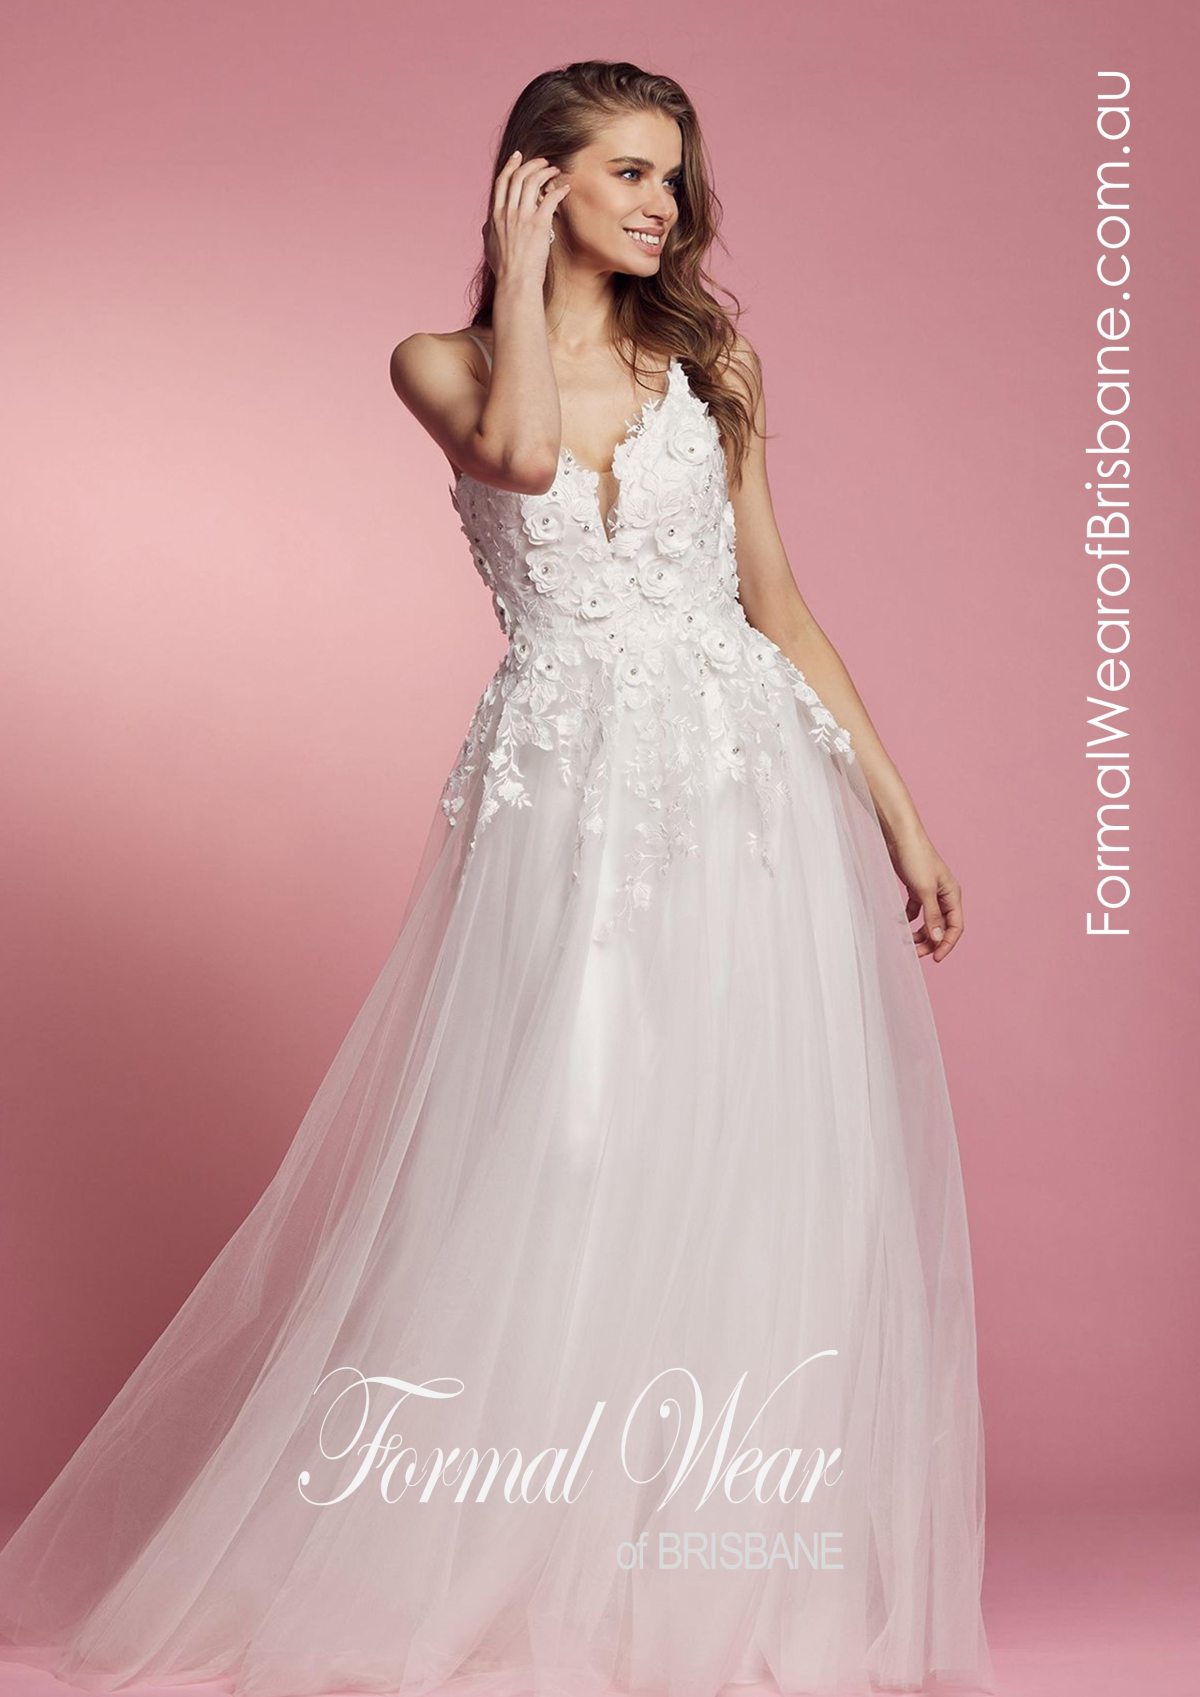 Top 10 Boutiques for Wedding Dresses in Brisbane | Wedding Diaries